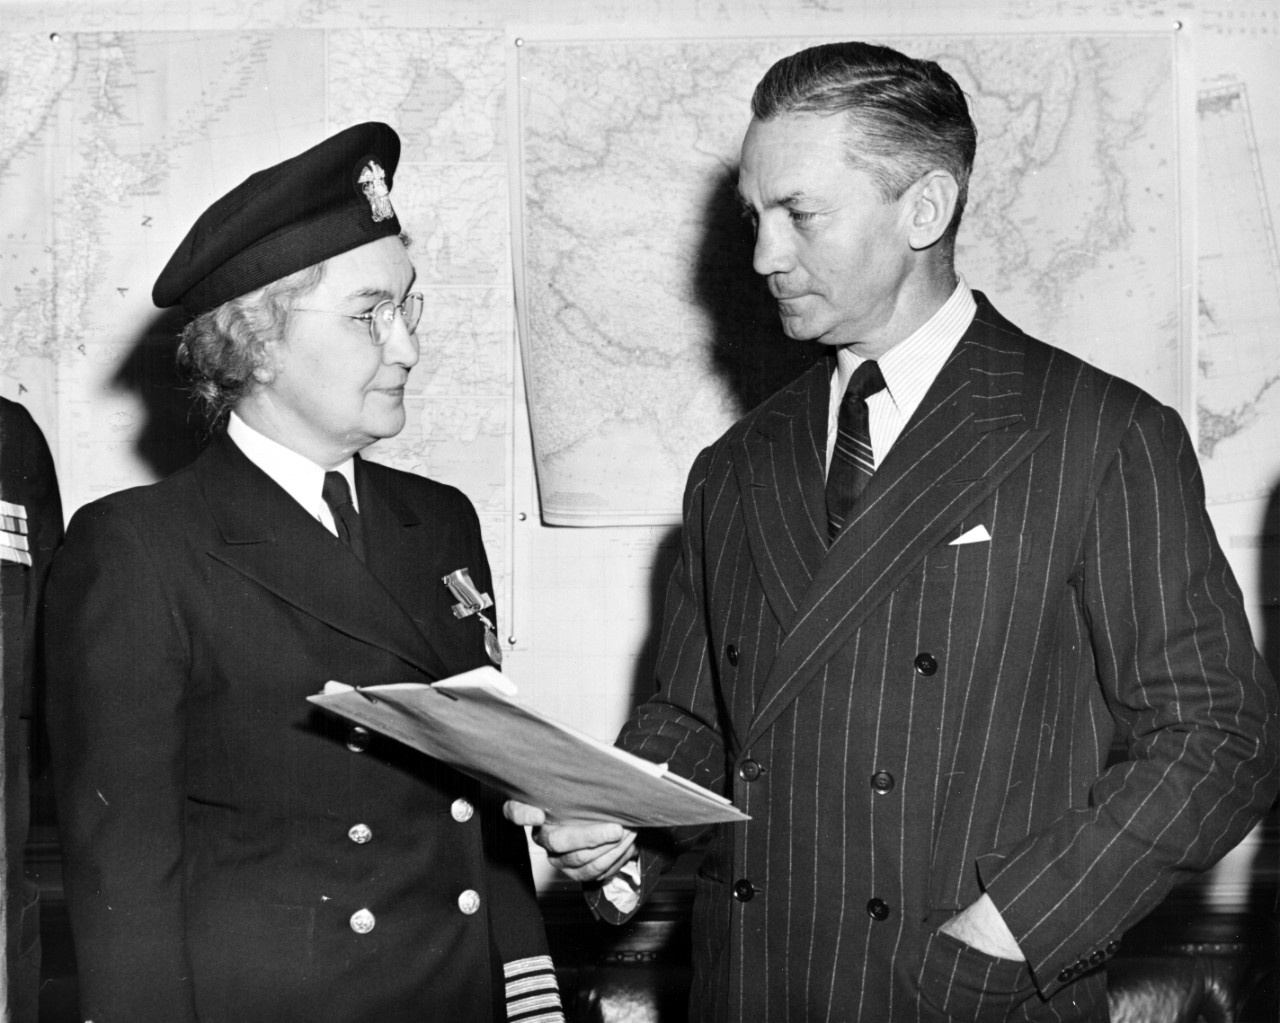 Captain Dauser stands in her blues uniform (with cap) next to a man in a suit holding an award